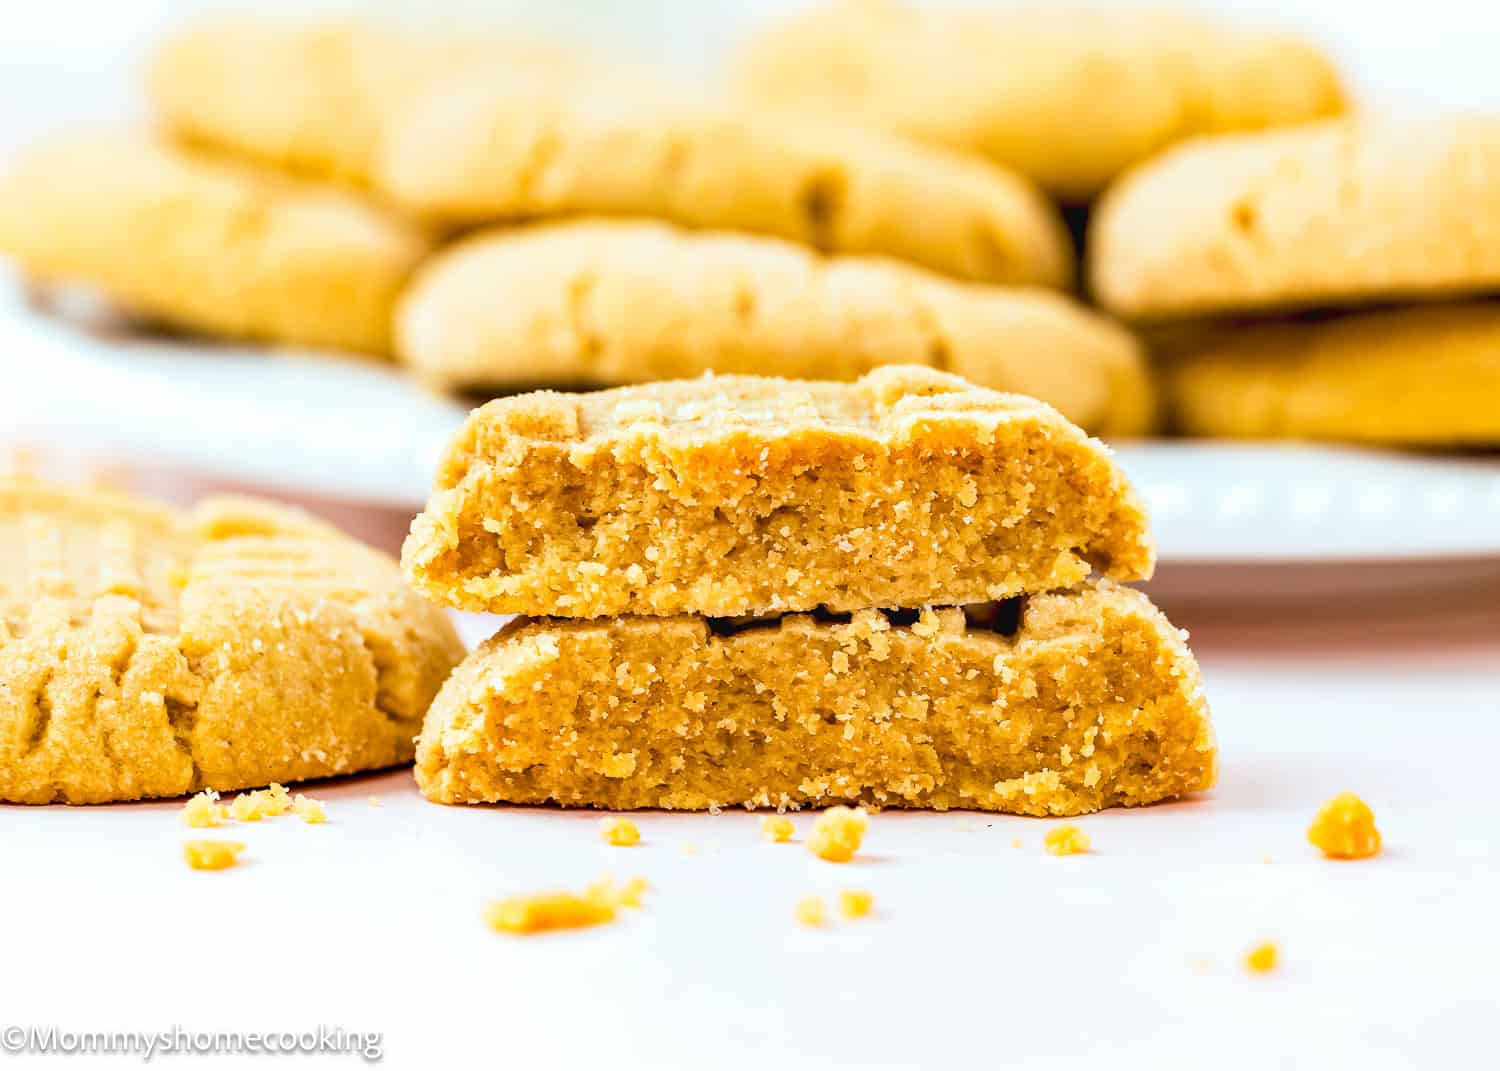 one egg-free Peanut Butter Cookie cut in half showing its soft and thick texture.